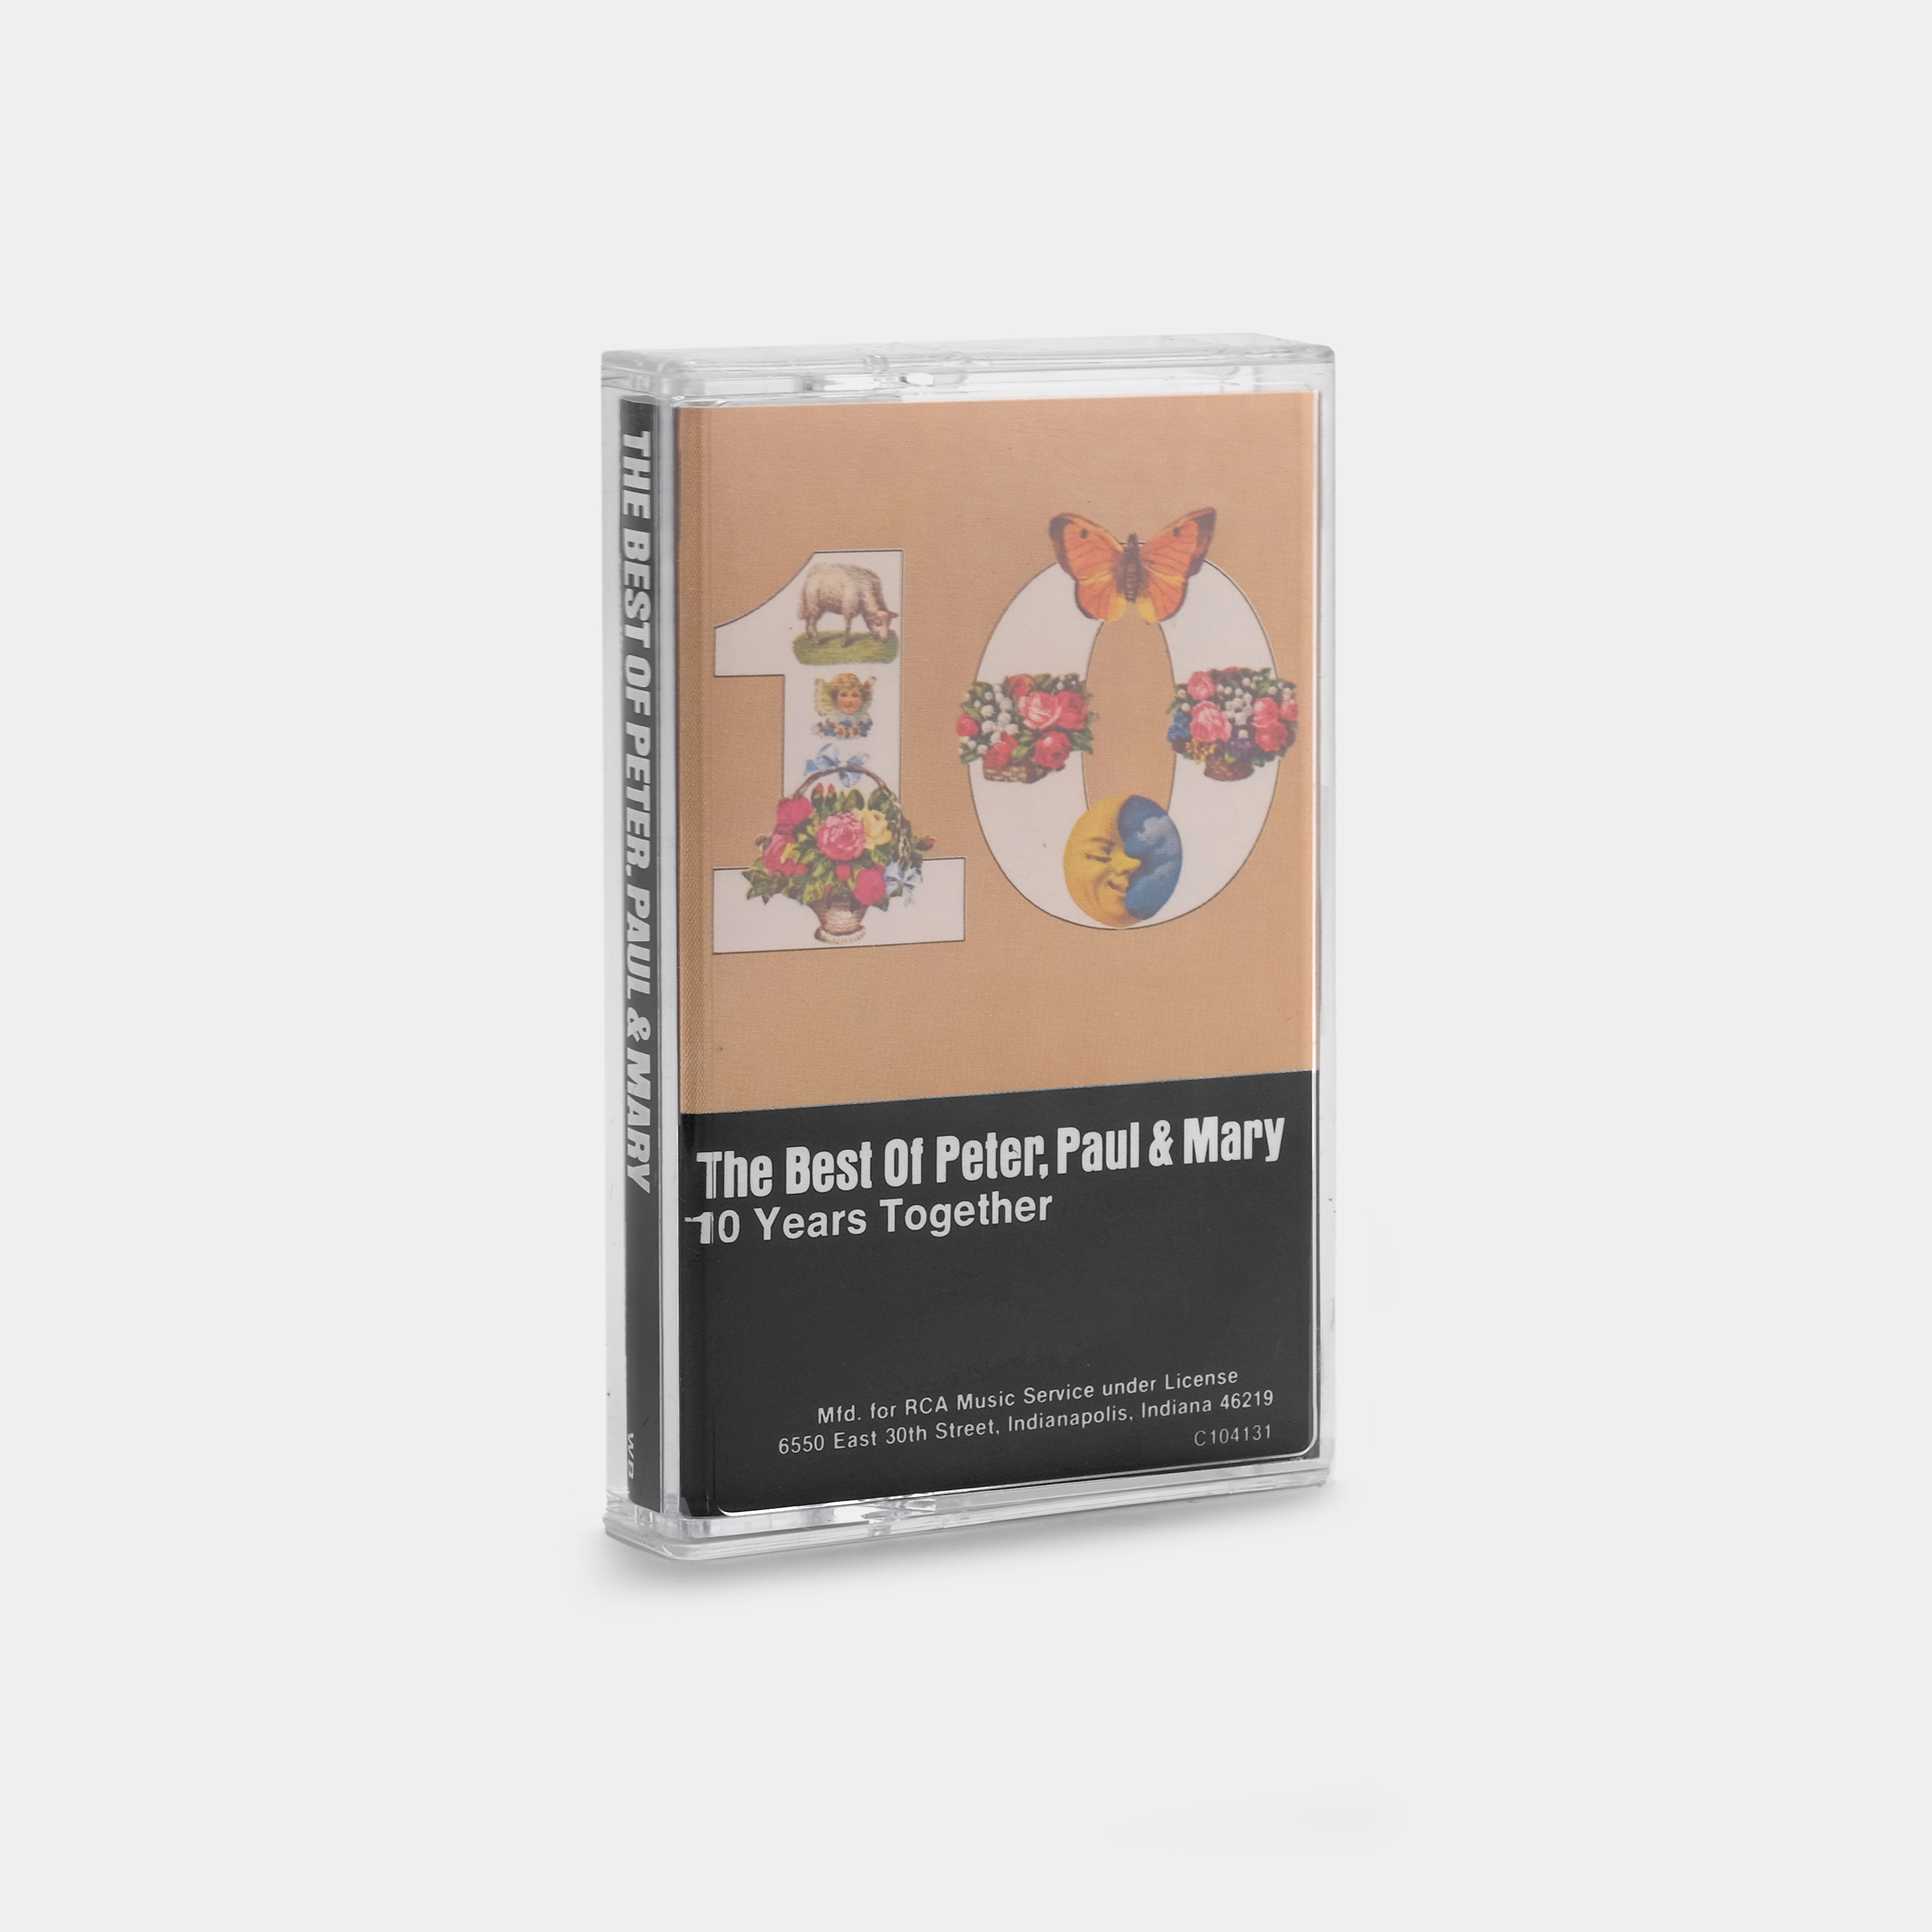 Peter, Paul & Mary - The Best of Peter, Paul & Mary 10 Years Together Cassette Tape